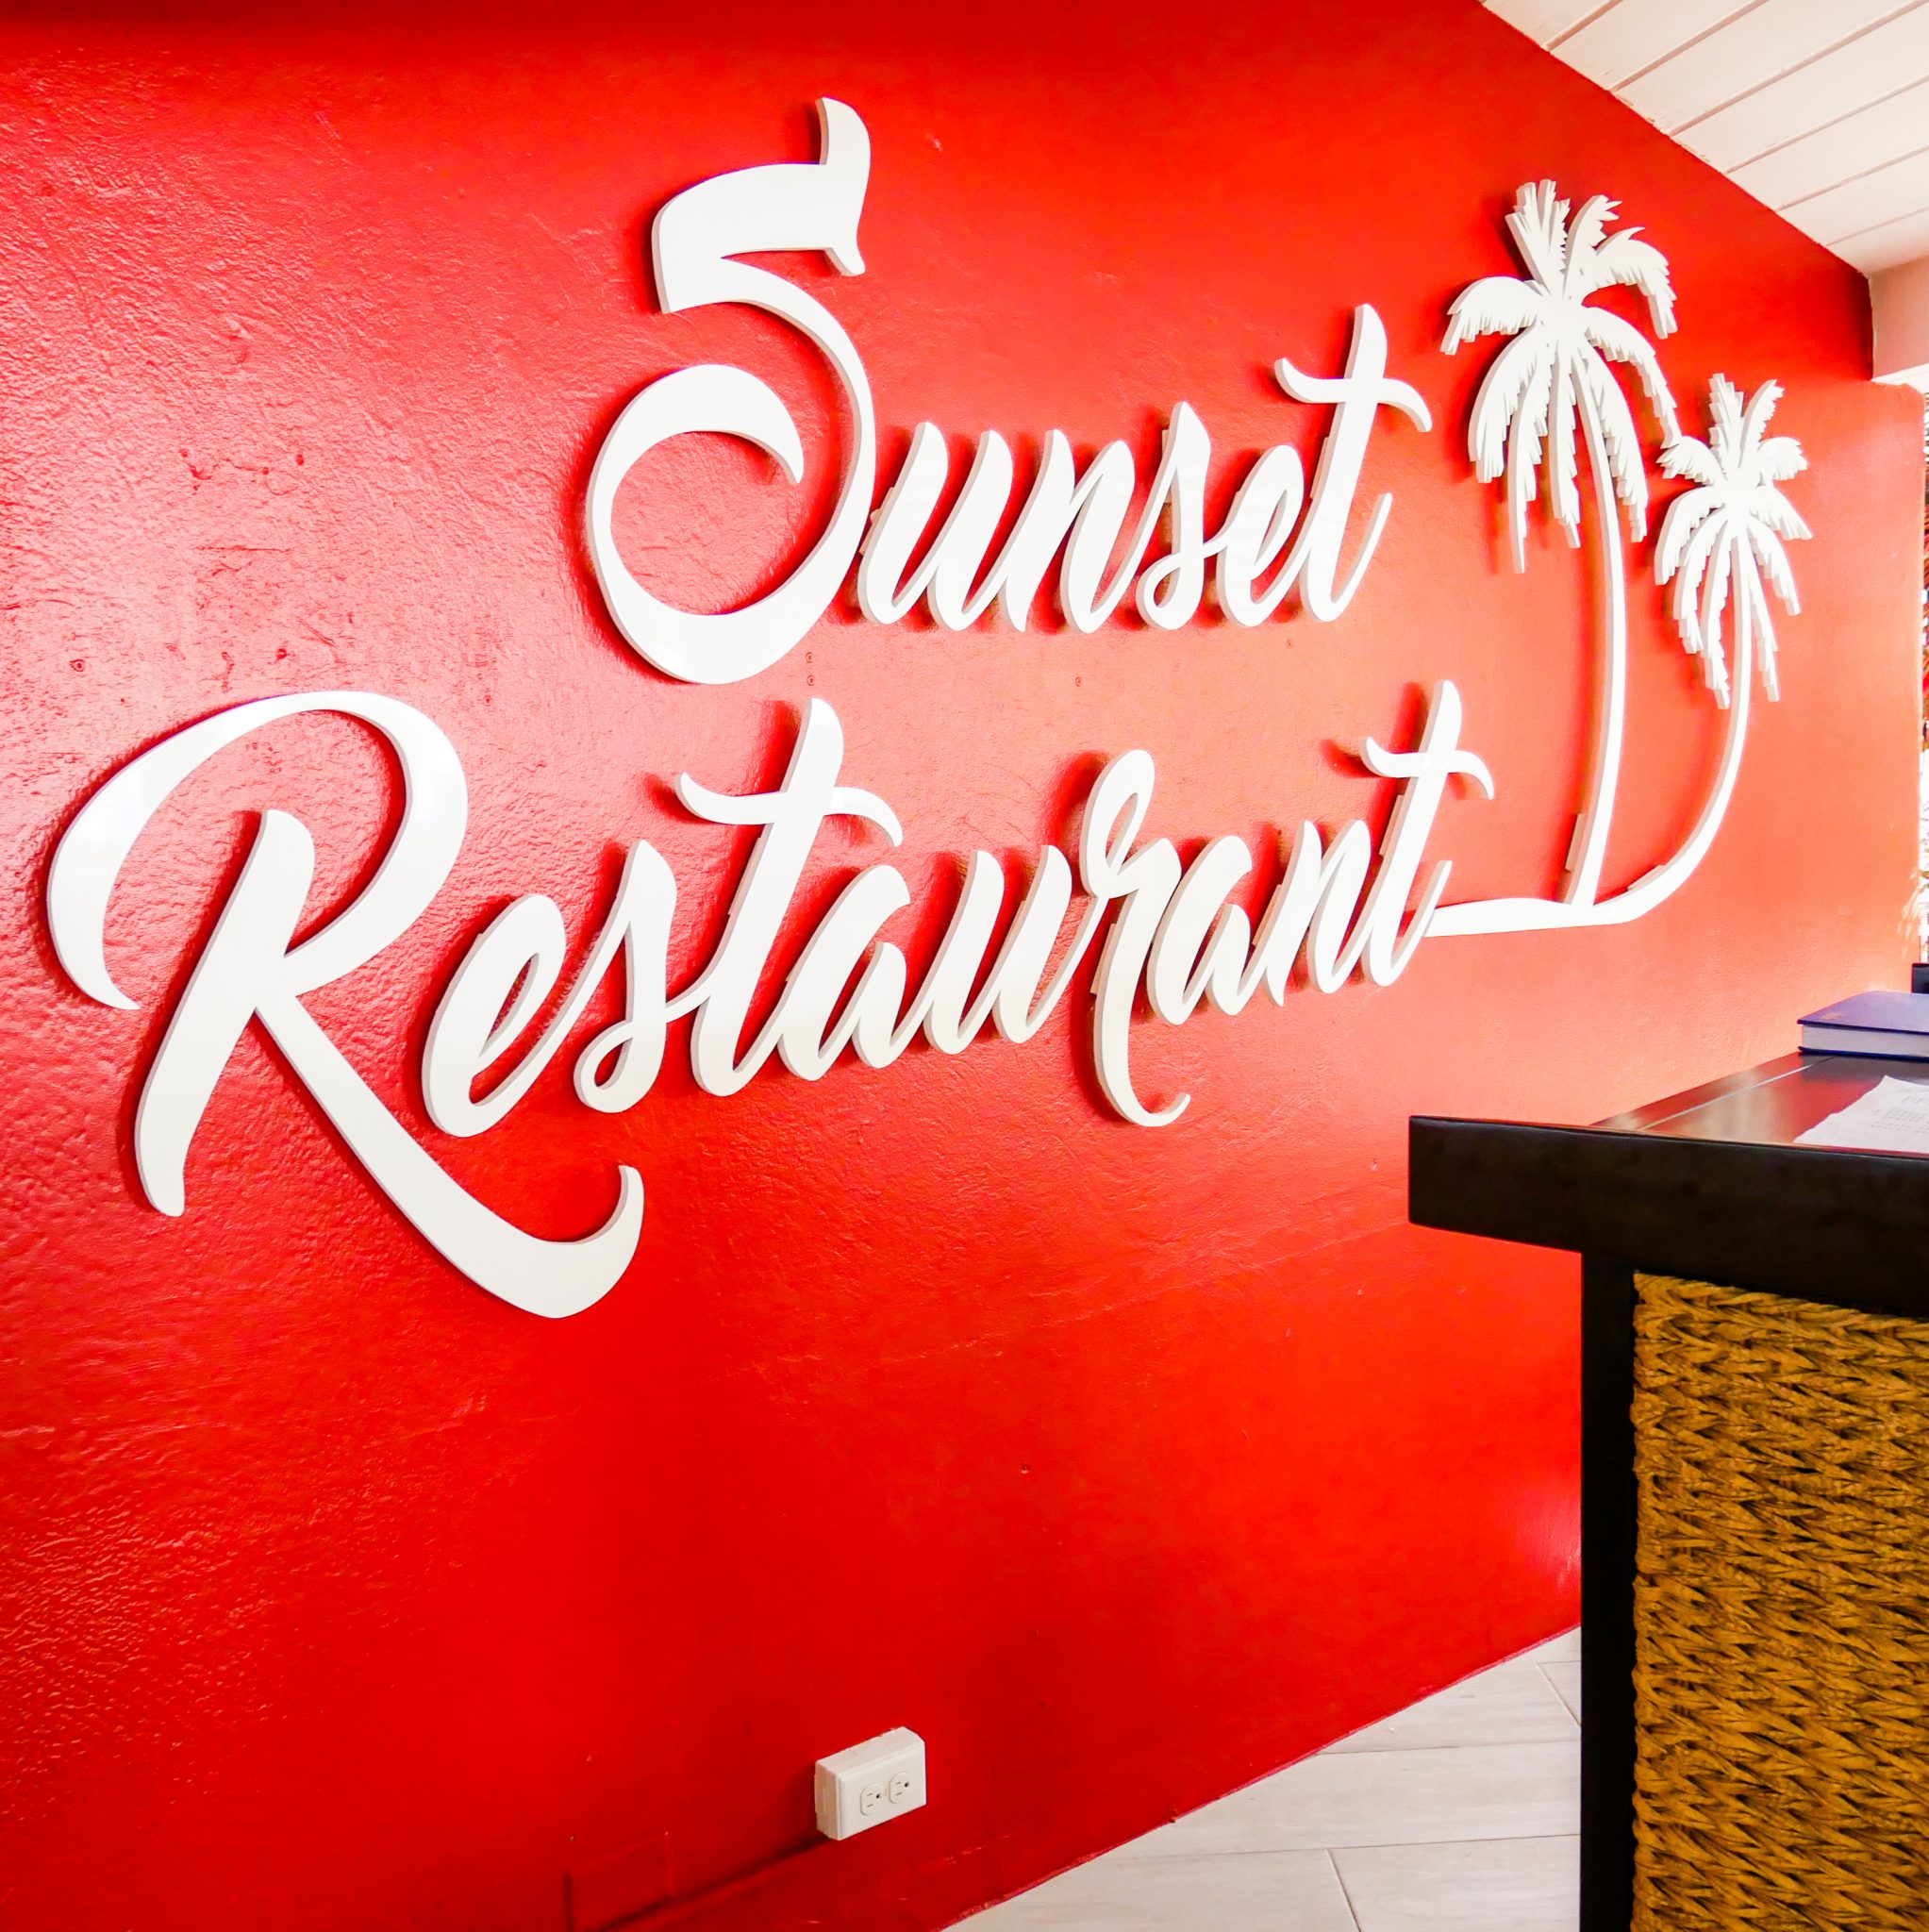 A bright red wall with the Sunset Restaurant logo in huge, raised white lettering